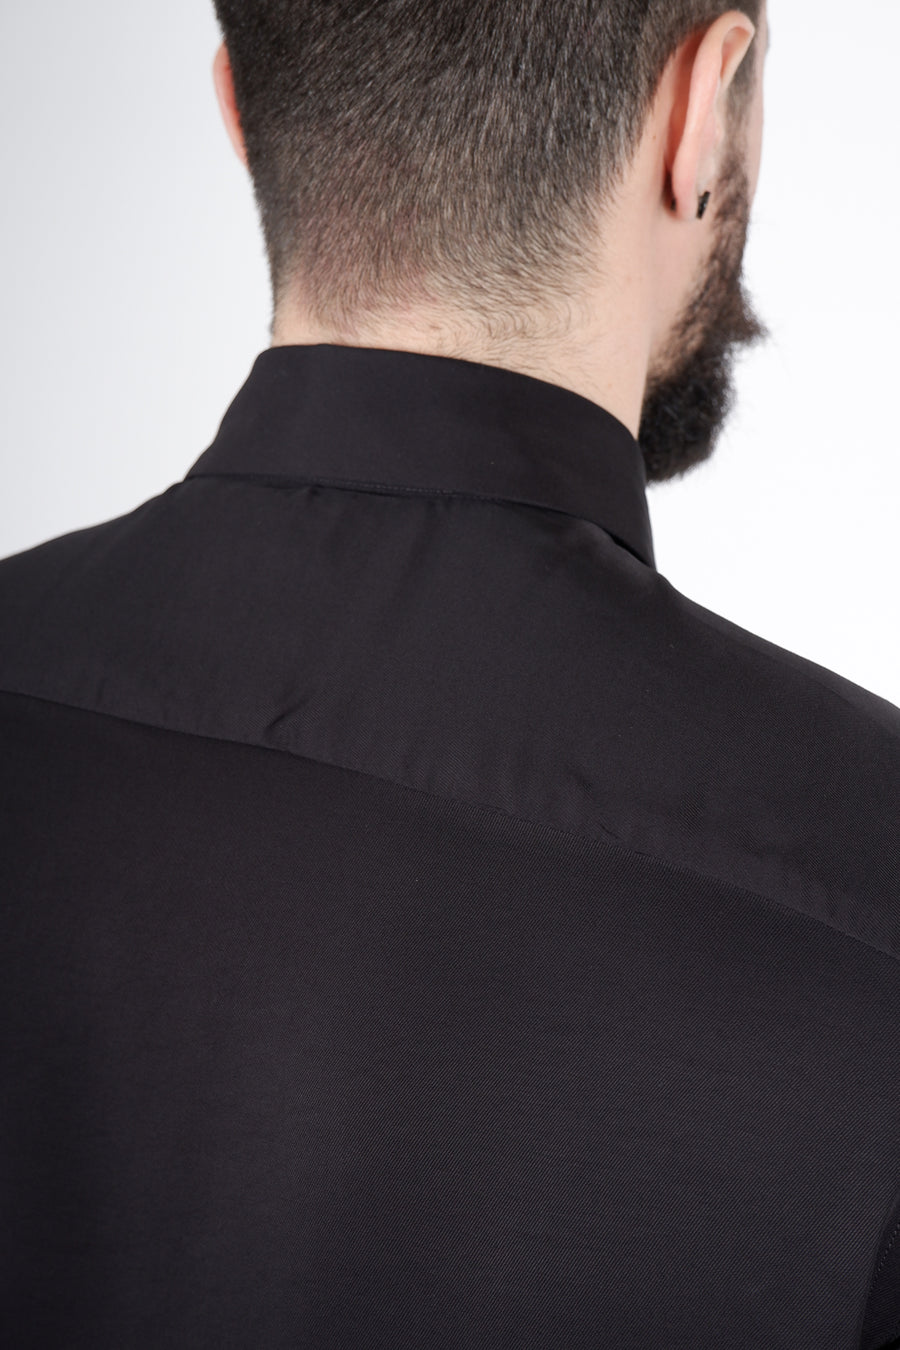 Buy the PT Torino Pure Silk Shirt Black at Intro. Spend £50 for free UK delivery. Official stockists. We ship worldwide.